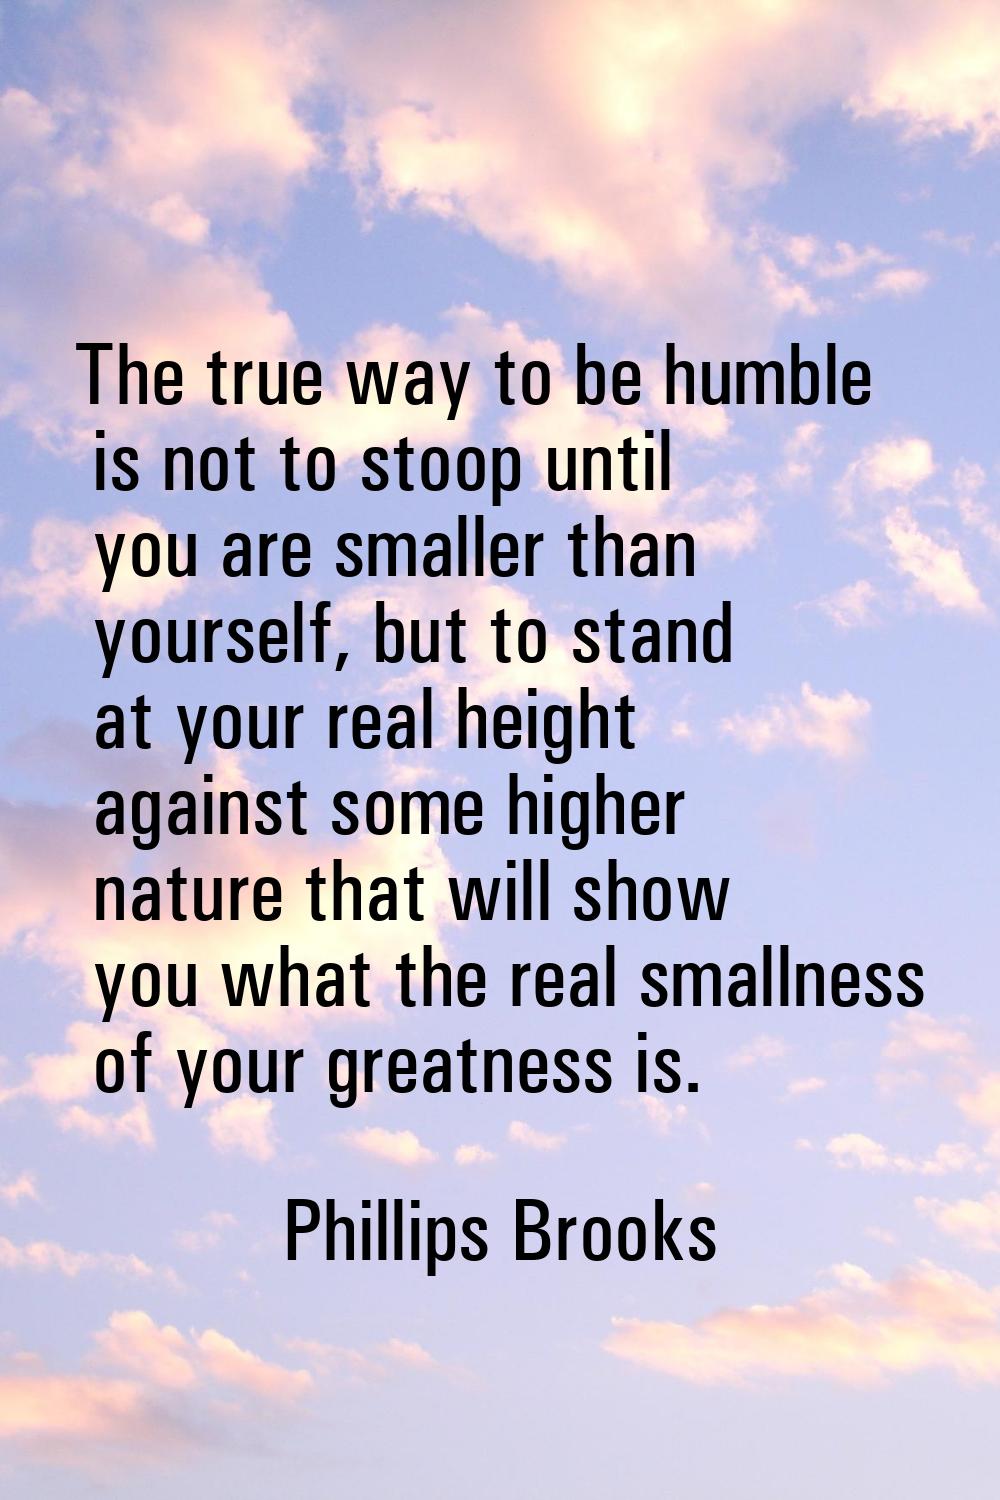 The true way to be humble is not to stoop until you are smaller than yourself, but to stand at your